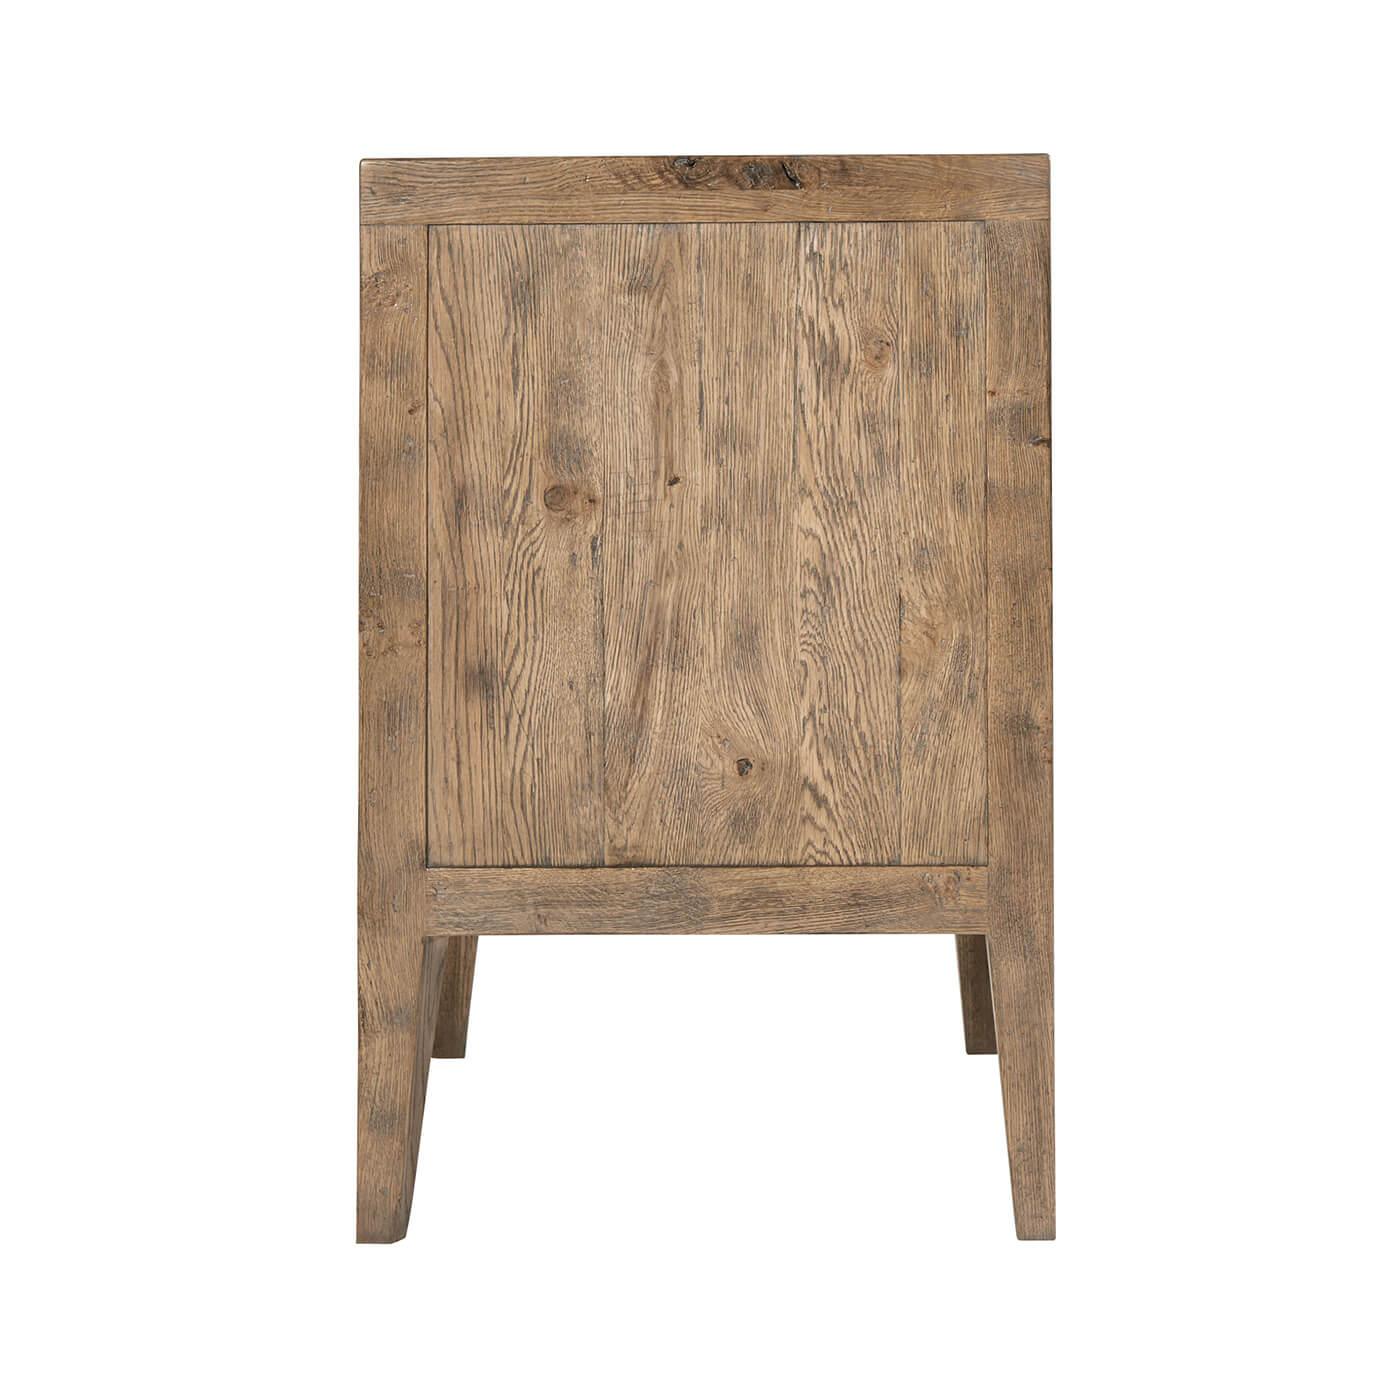 Vietnamese Modern Rustic Parquetry Nightstand For Sale